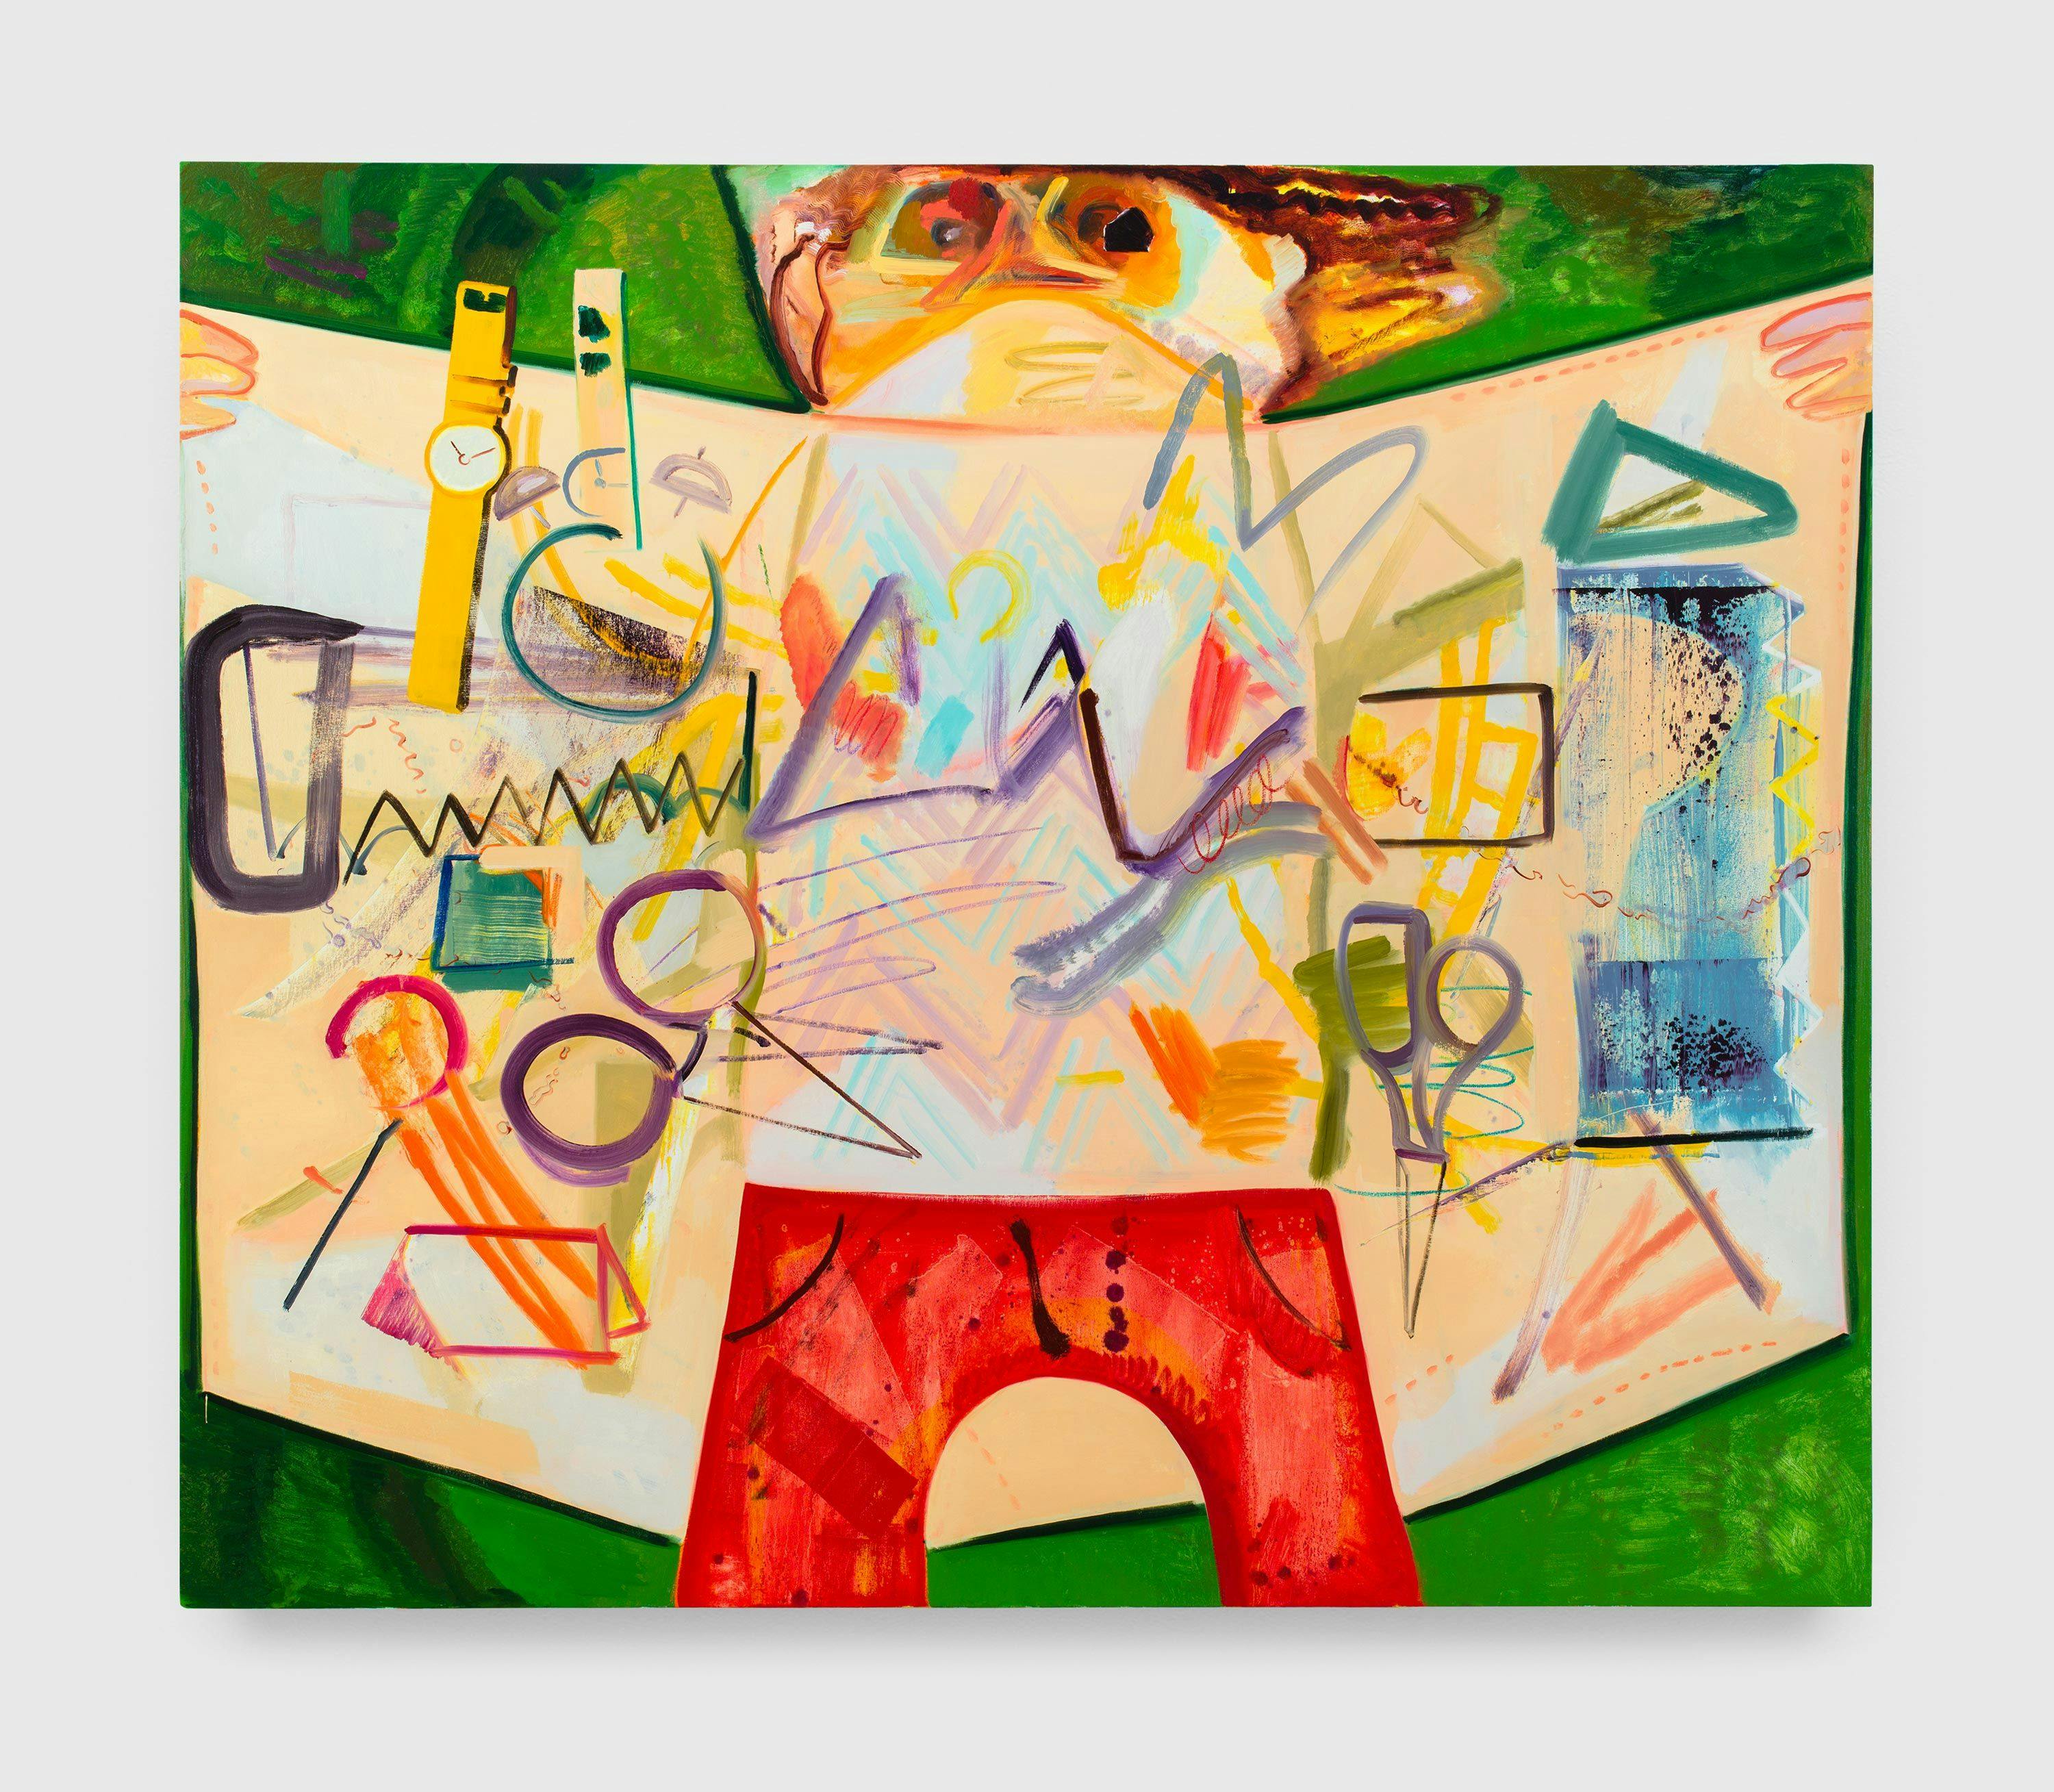 A painting by Dana Schutz, titled Flasher, dated 2012.